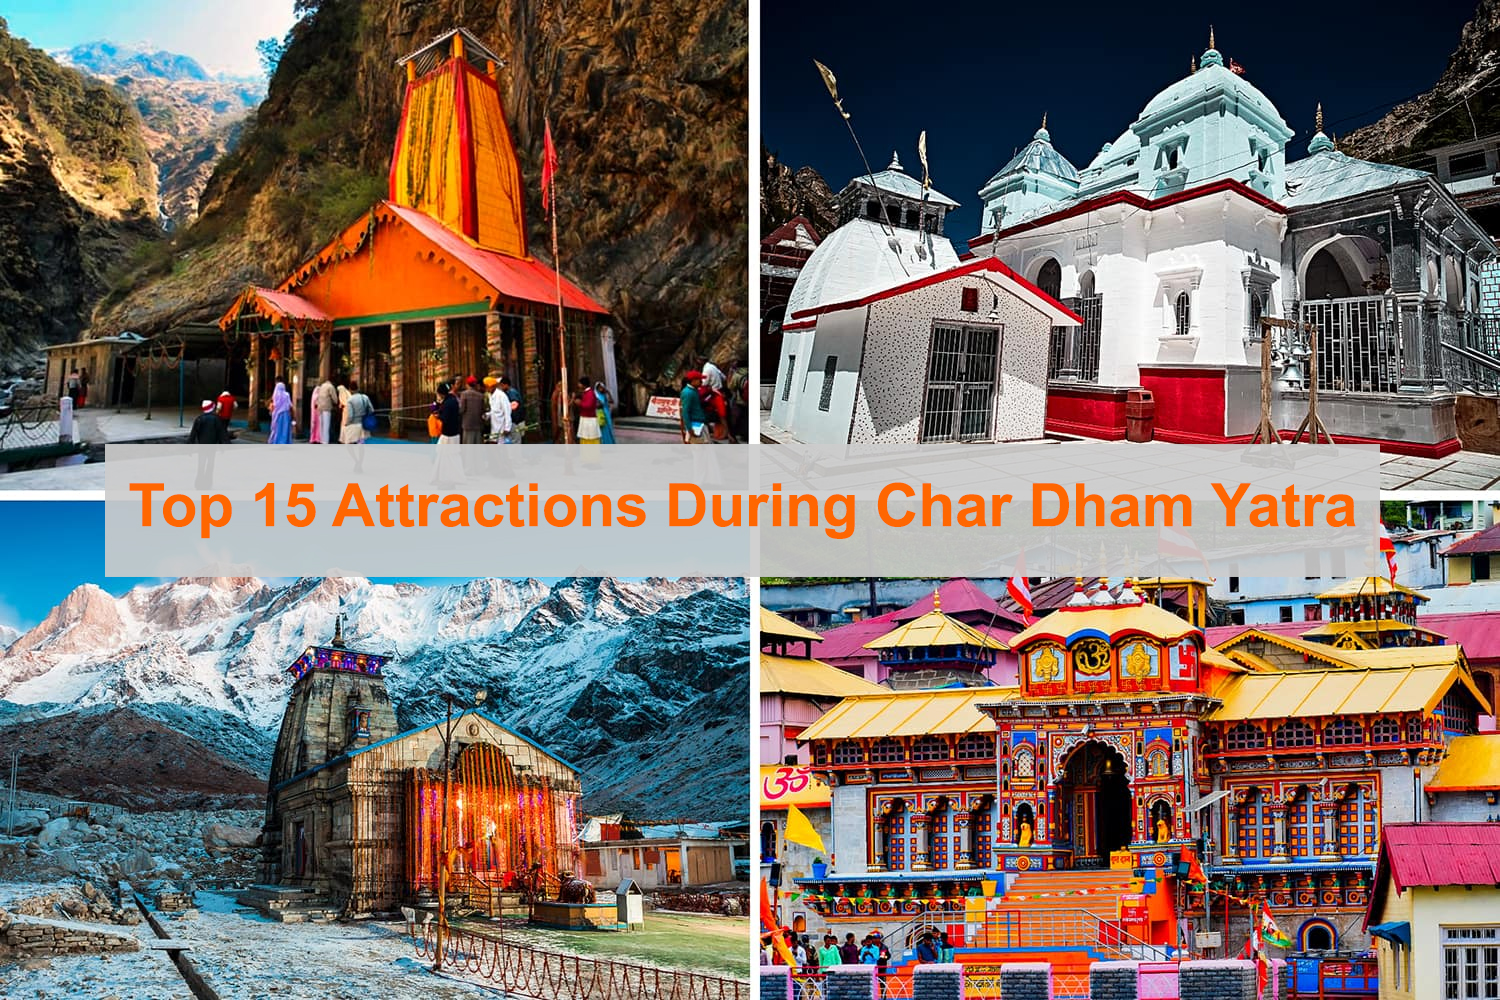 Top 15 Attractions to Explore During Char Dham Yatra